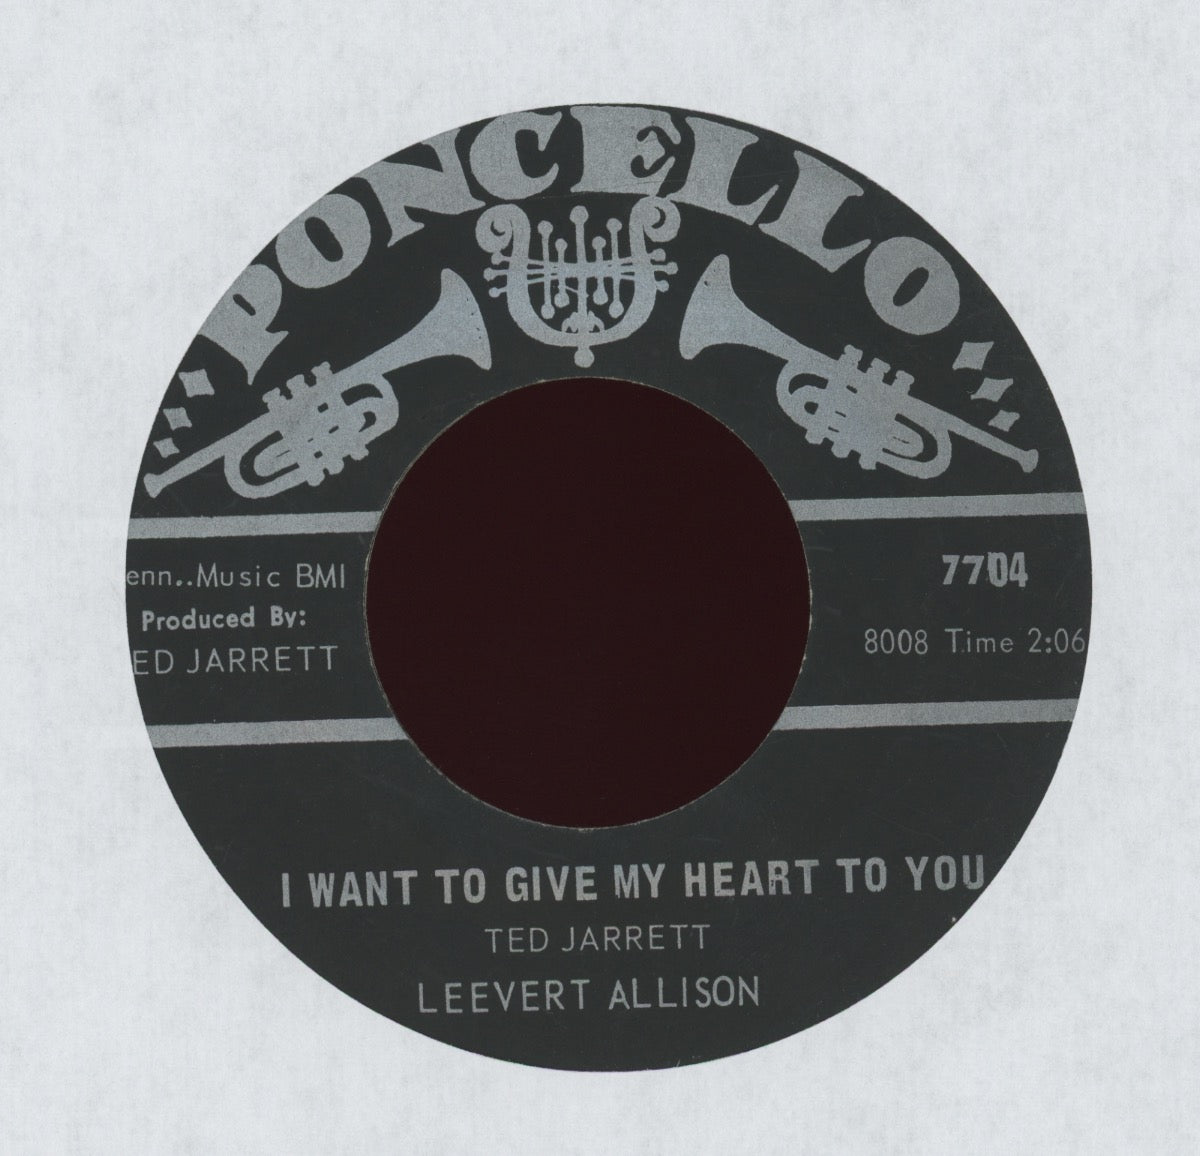 Leevert Allison - I Want To Give My Heart To You on Poncello Levert Allison